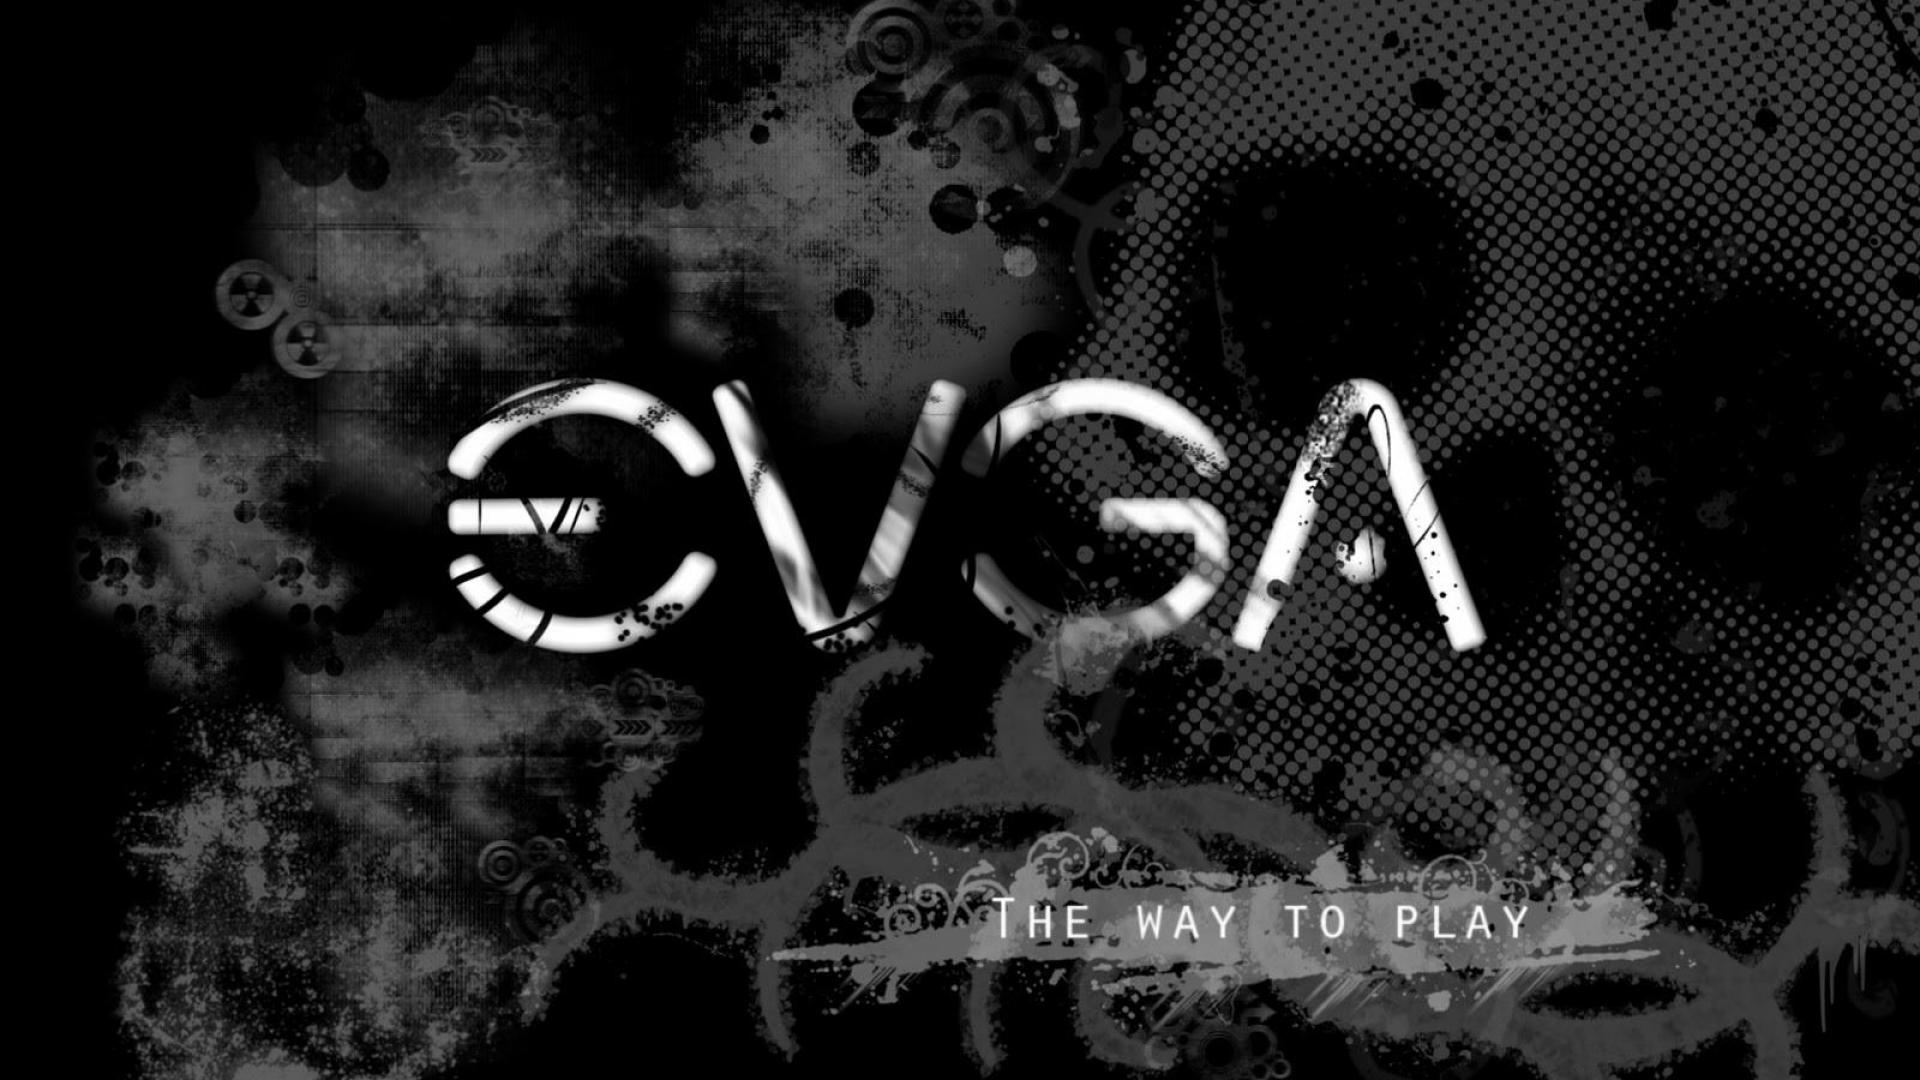 Powered By Evga Wallpaper HD